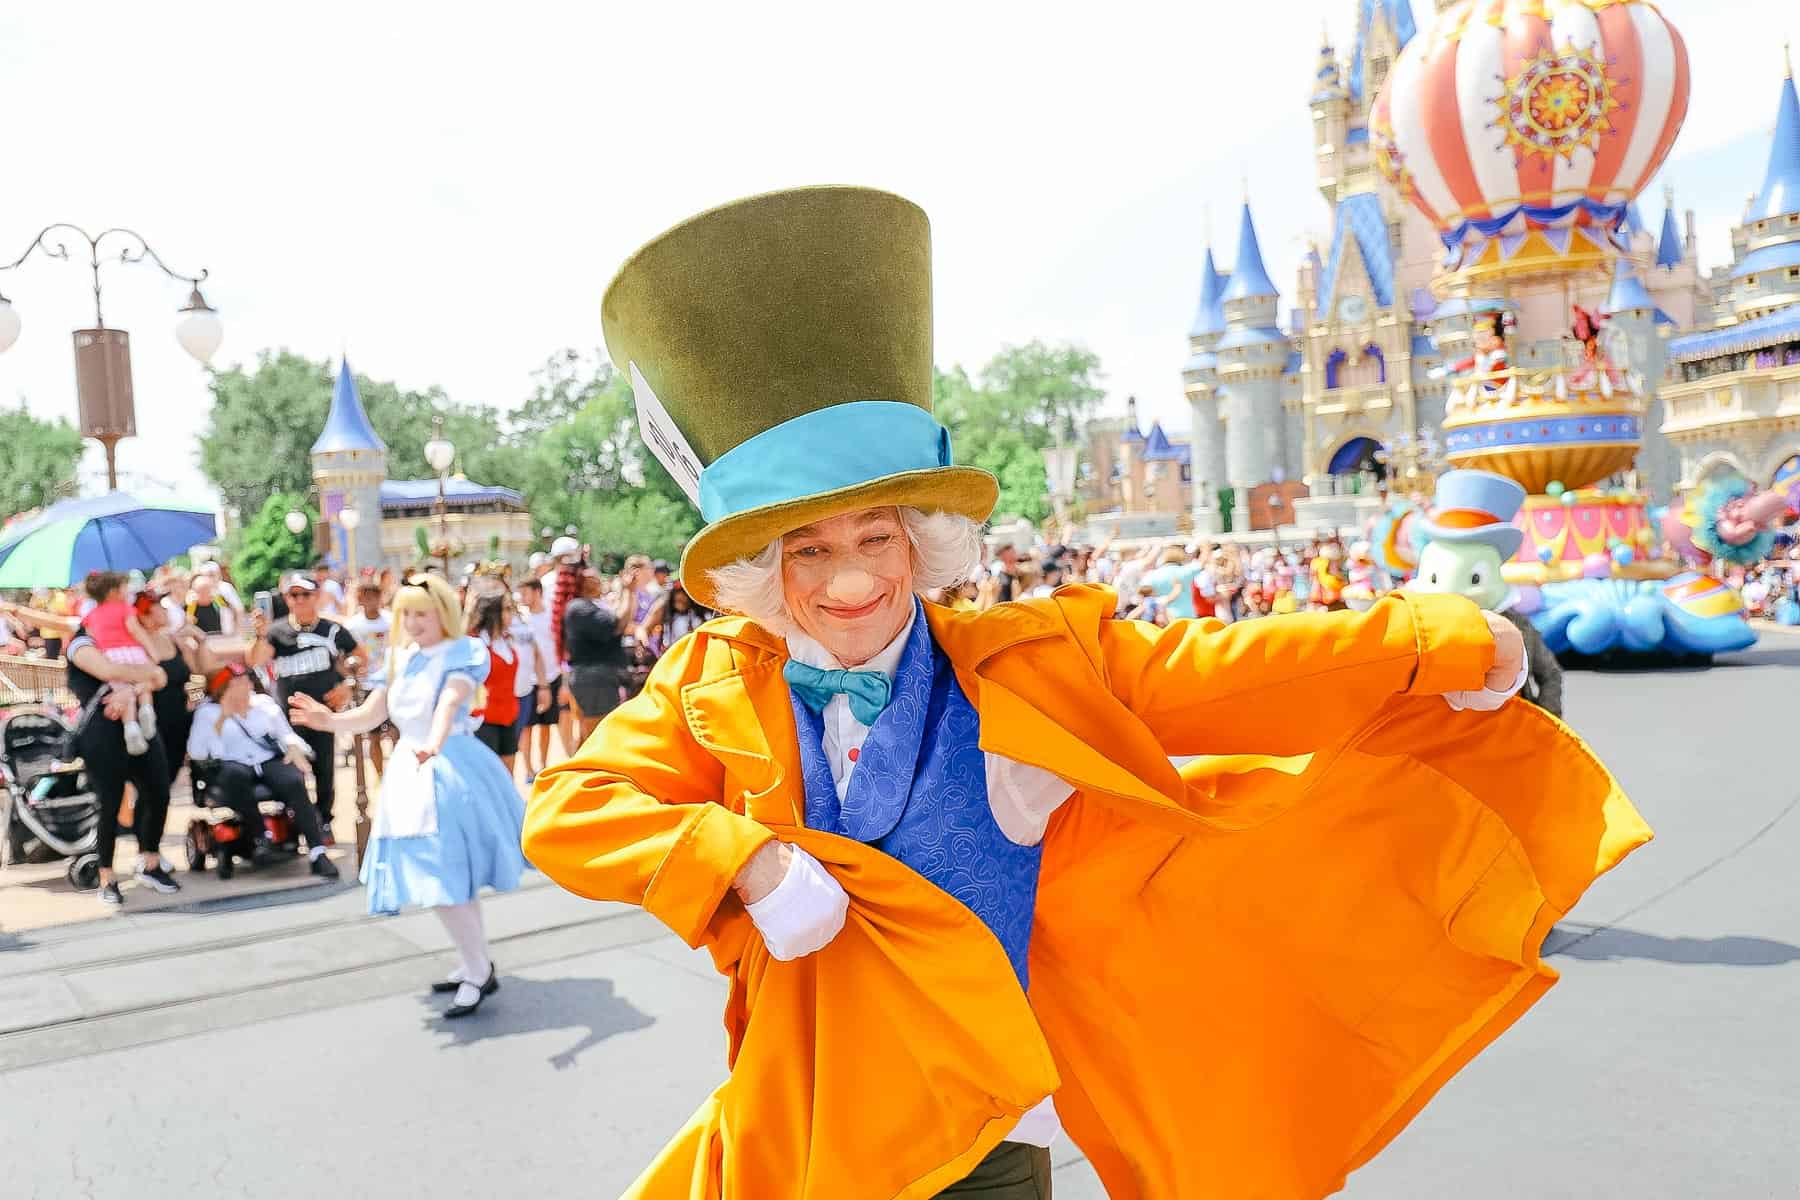 The Mad Hatter poses for a photo during the parade.